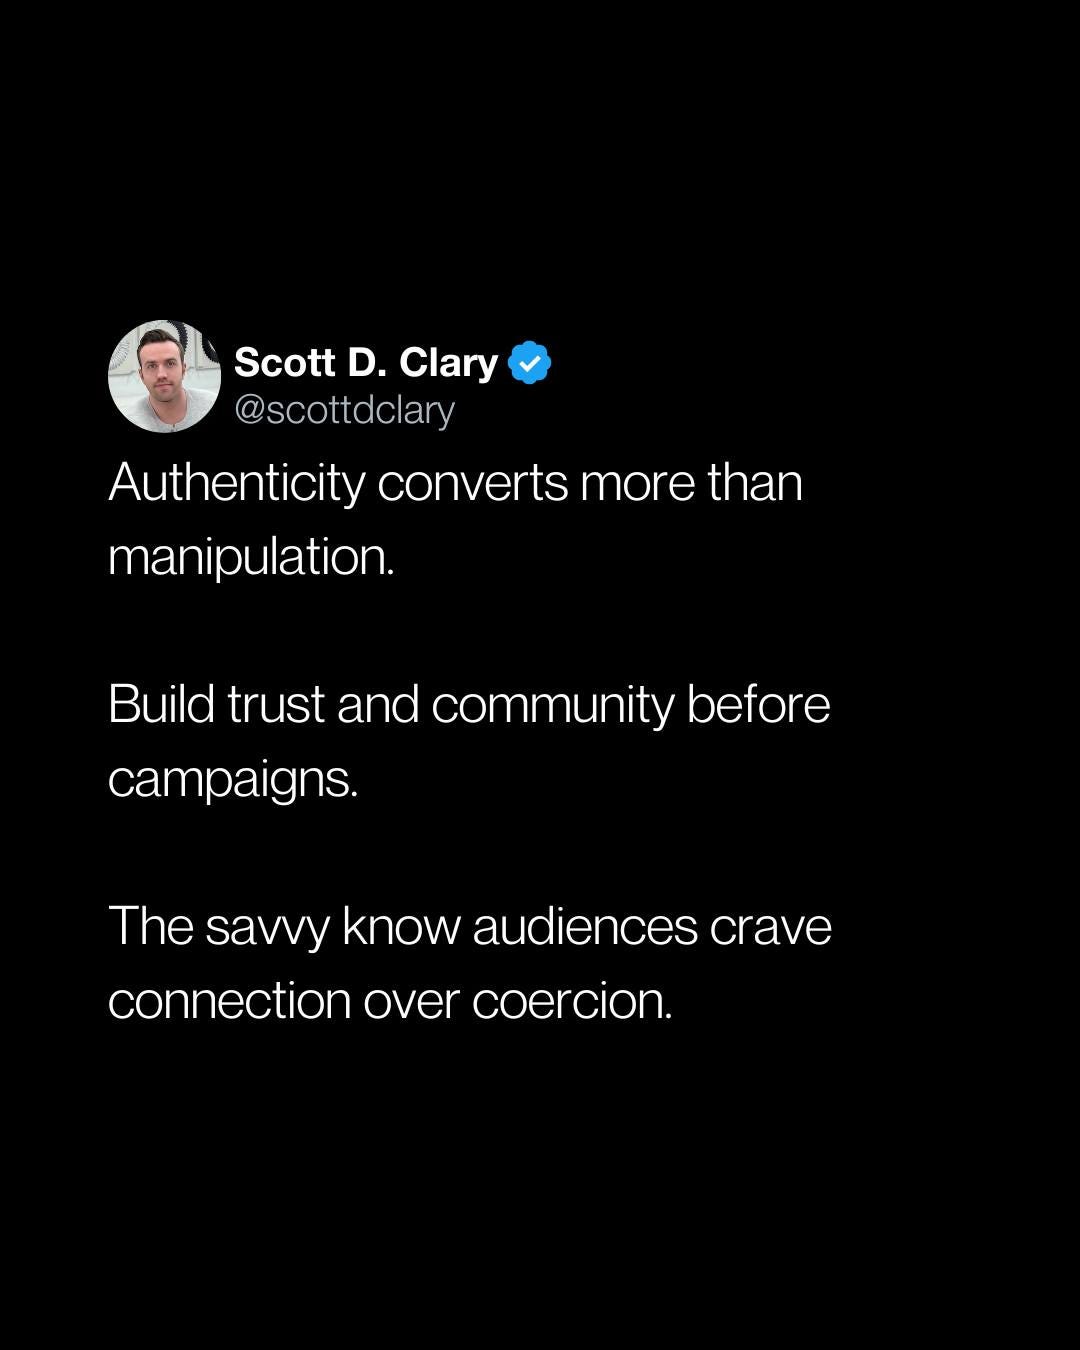 May be an image of 1 person and text that says 'Scott D. Clary @scottdclary Authenticity converts more than manipulation. Build trust and community before oefore campaigns. The savvy know audiences crave connection over coercion.'